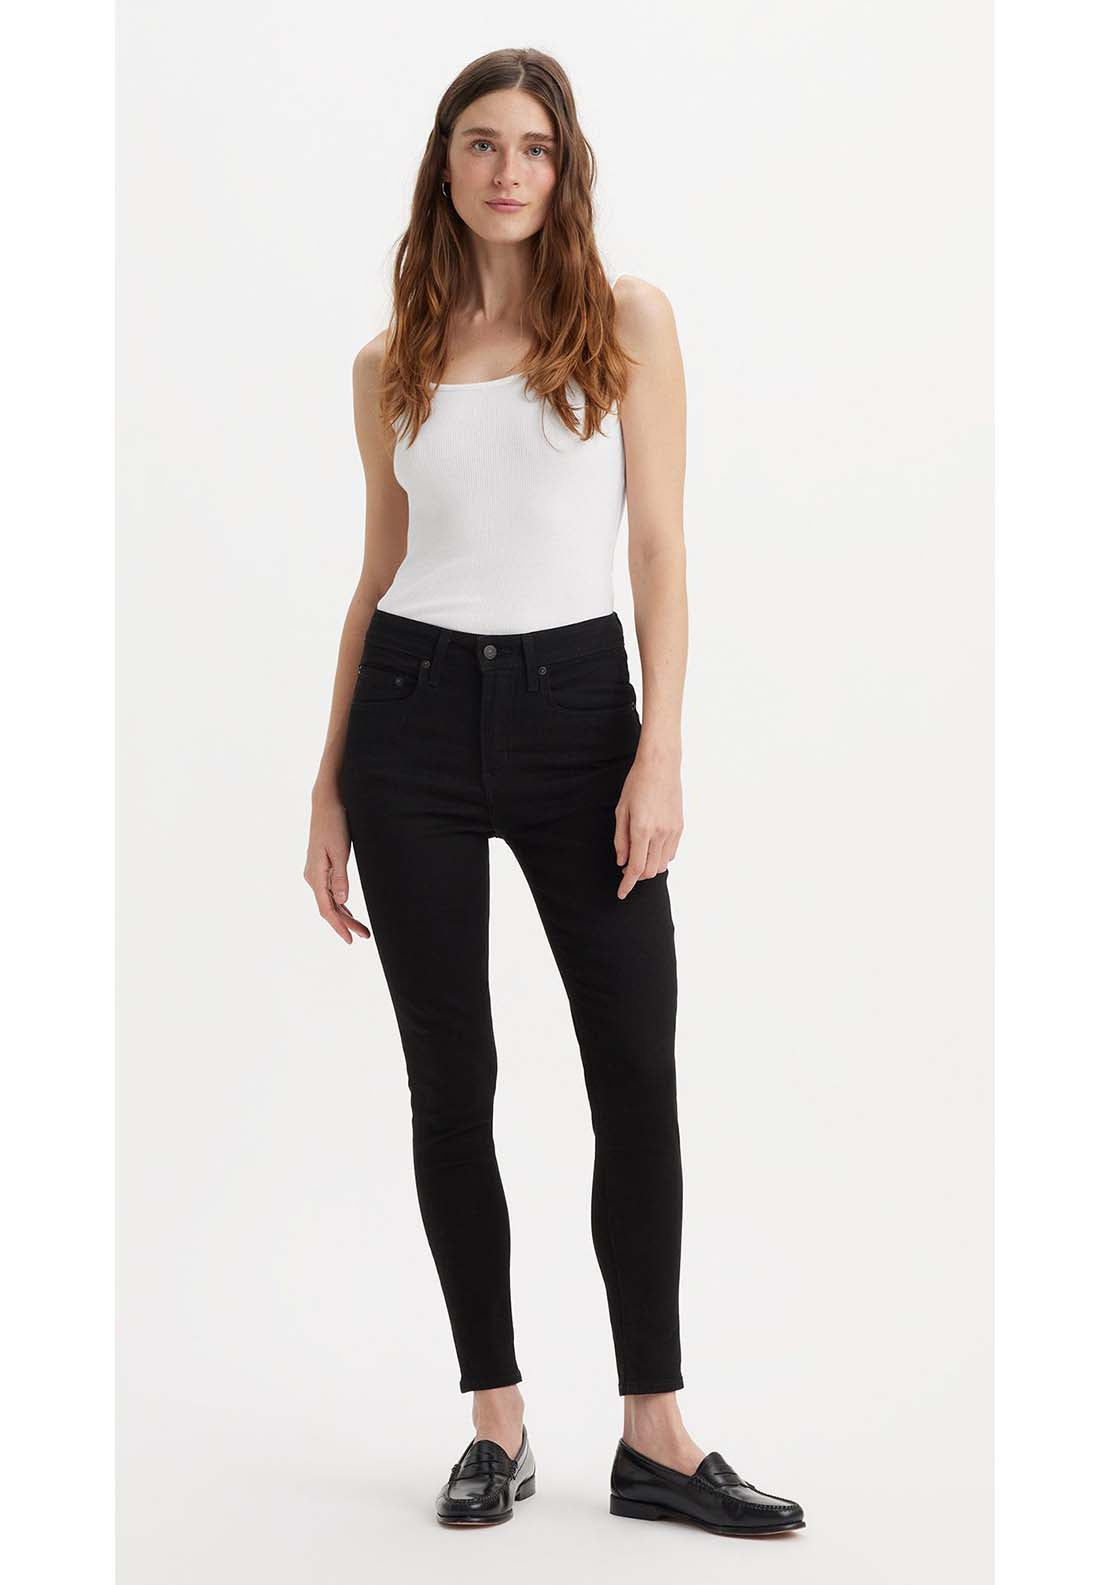 Levis 721 High Rise Skinny Jean 5 Shaws Department Stores